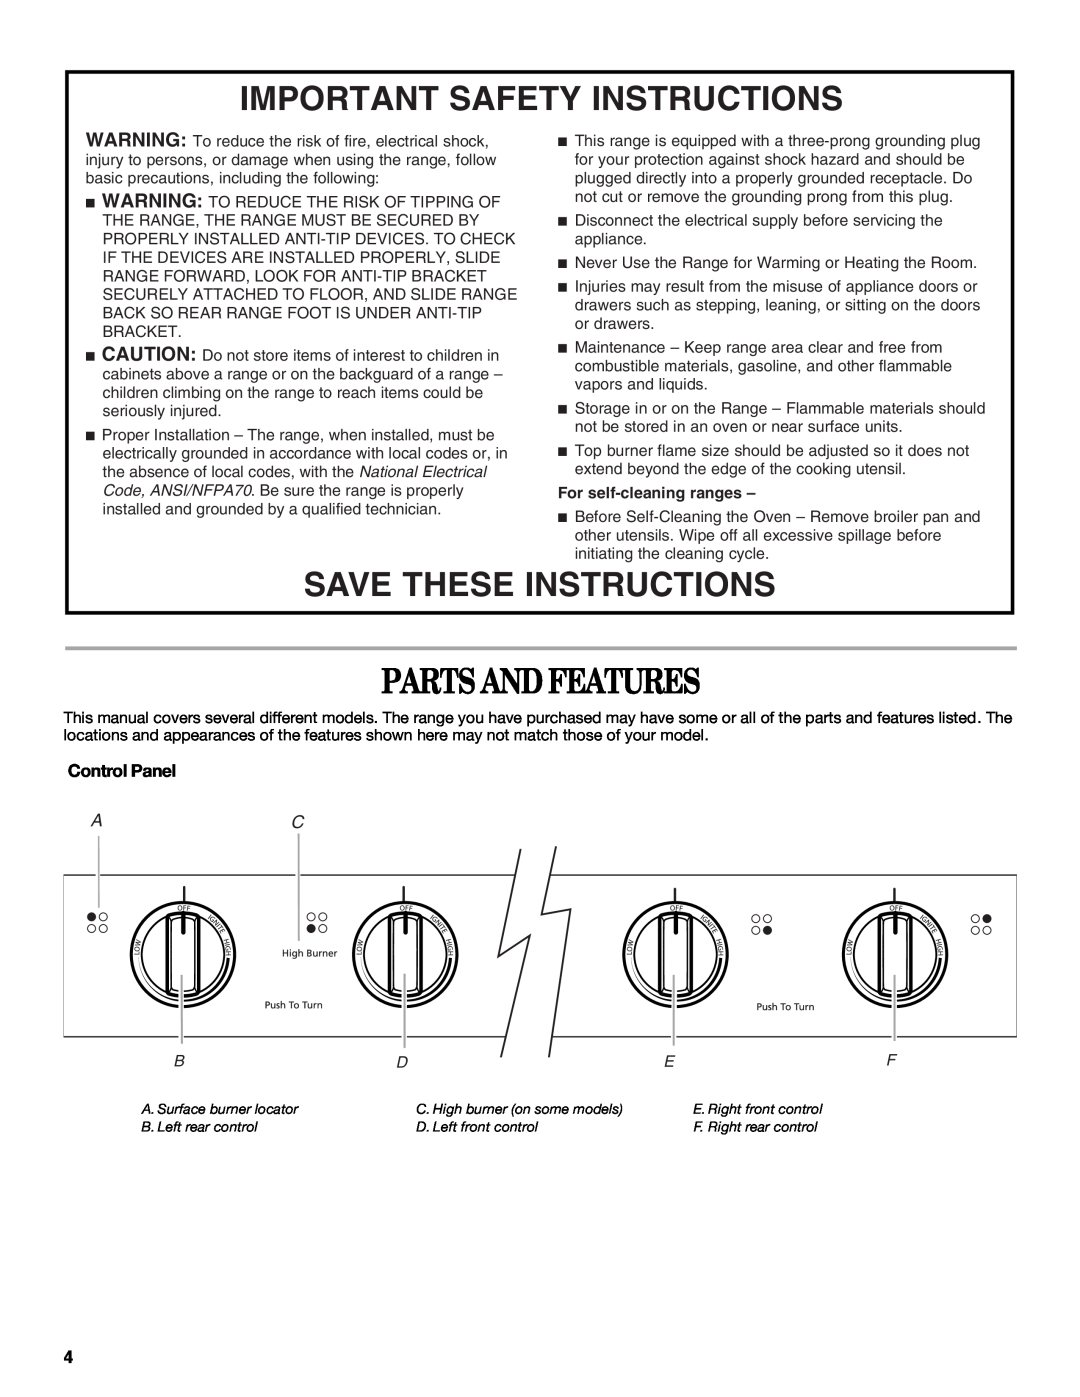 Whirlpool IGS325RQ1 manual Parts And Features, Important Safety Instructions, Save These Instructions, Control Panel 